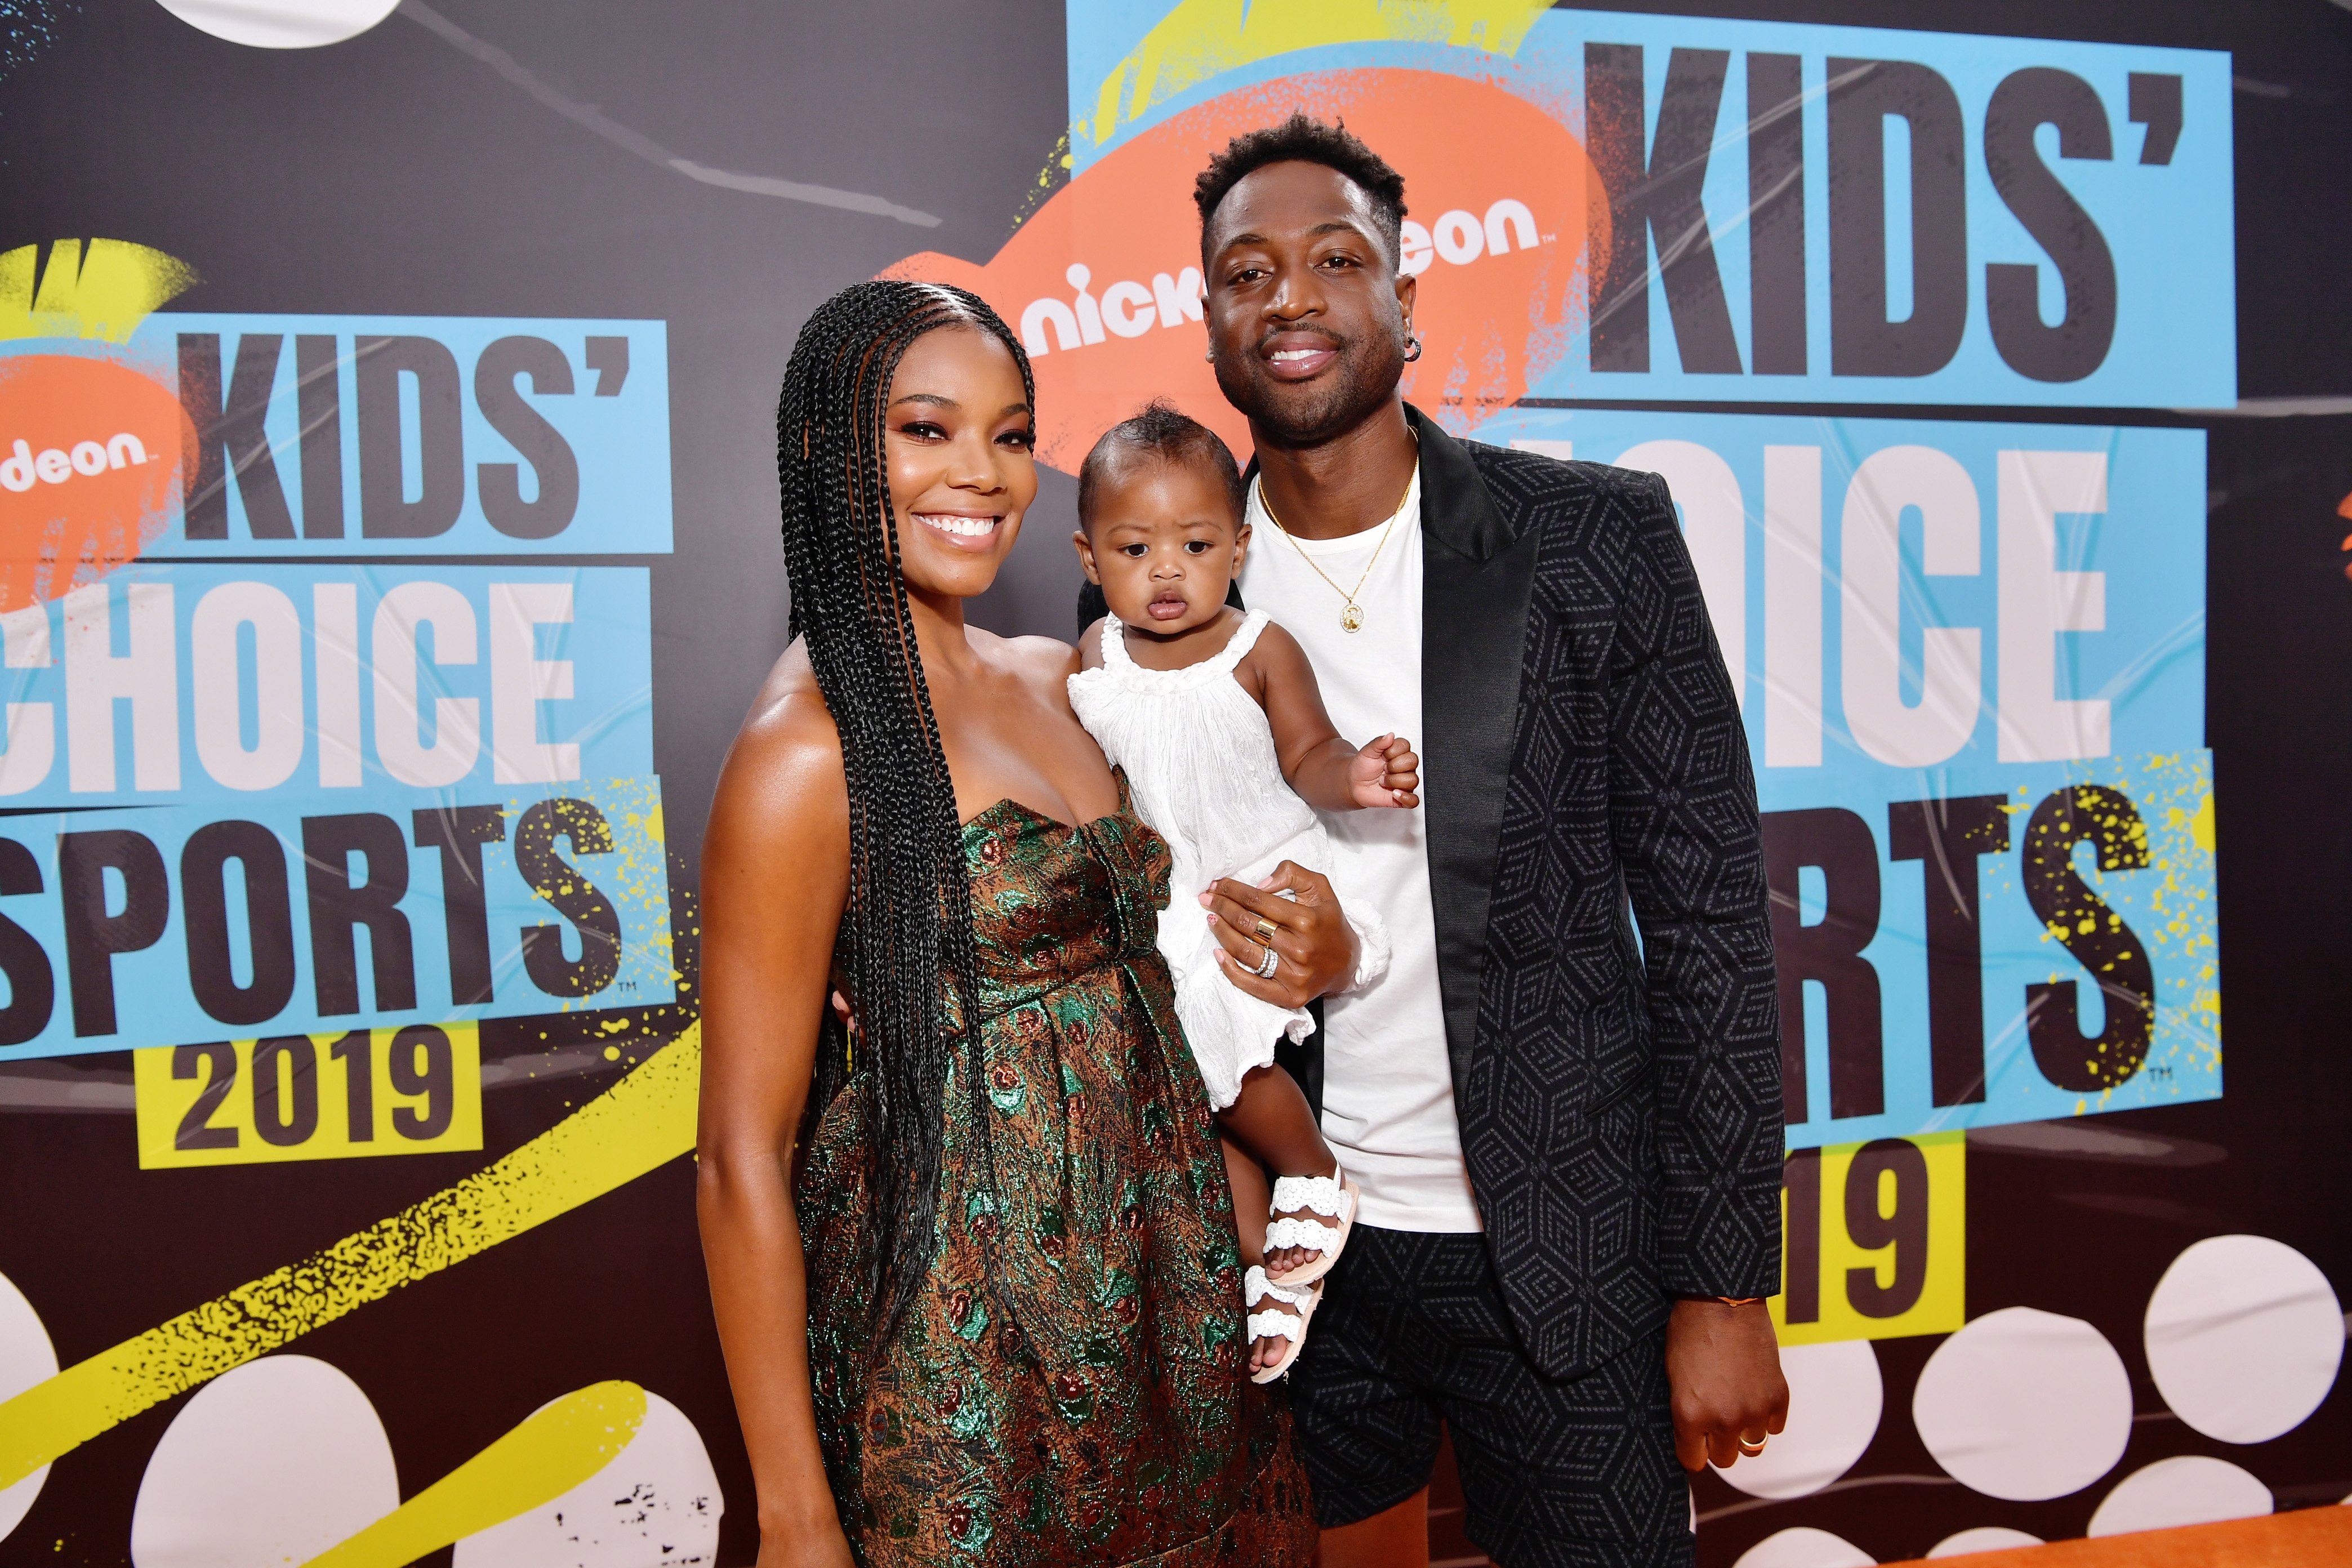 Parents Gabrielle Union and Dwyane Wade with their daughter, Kaavia James attending Nickelodeon KIds' Choice Sports 2019. | Photo: Getty Images